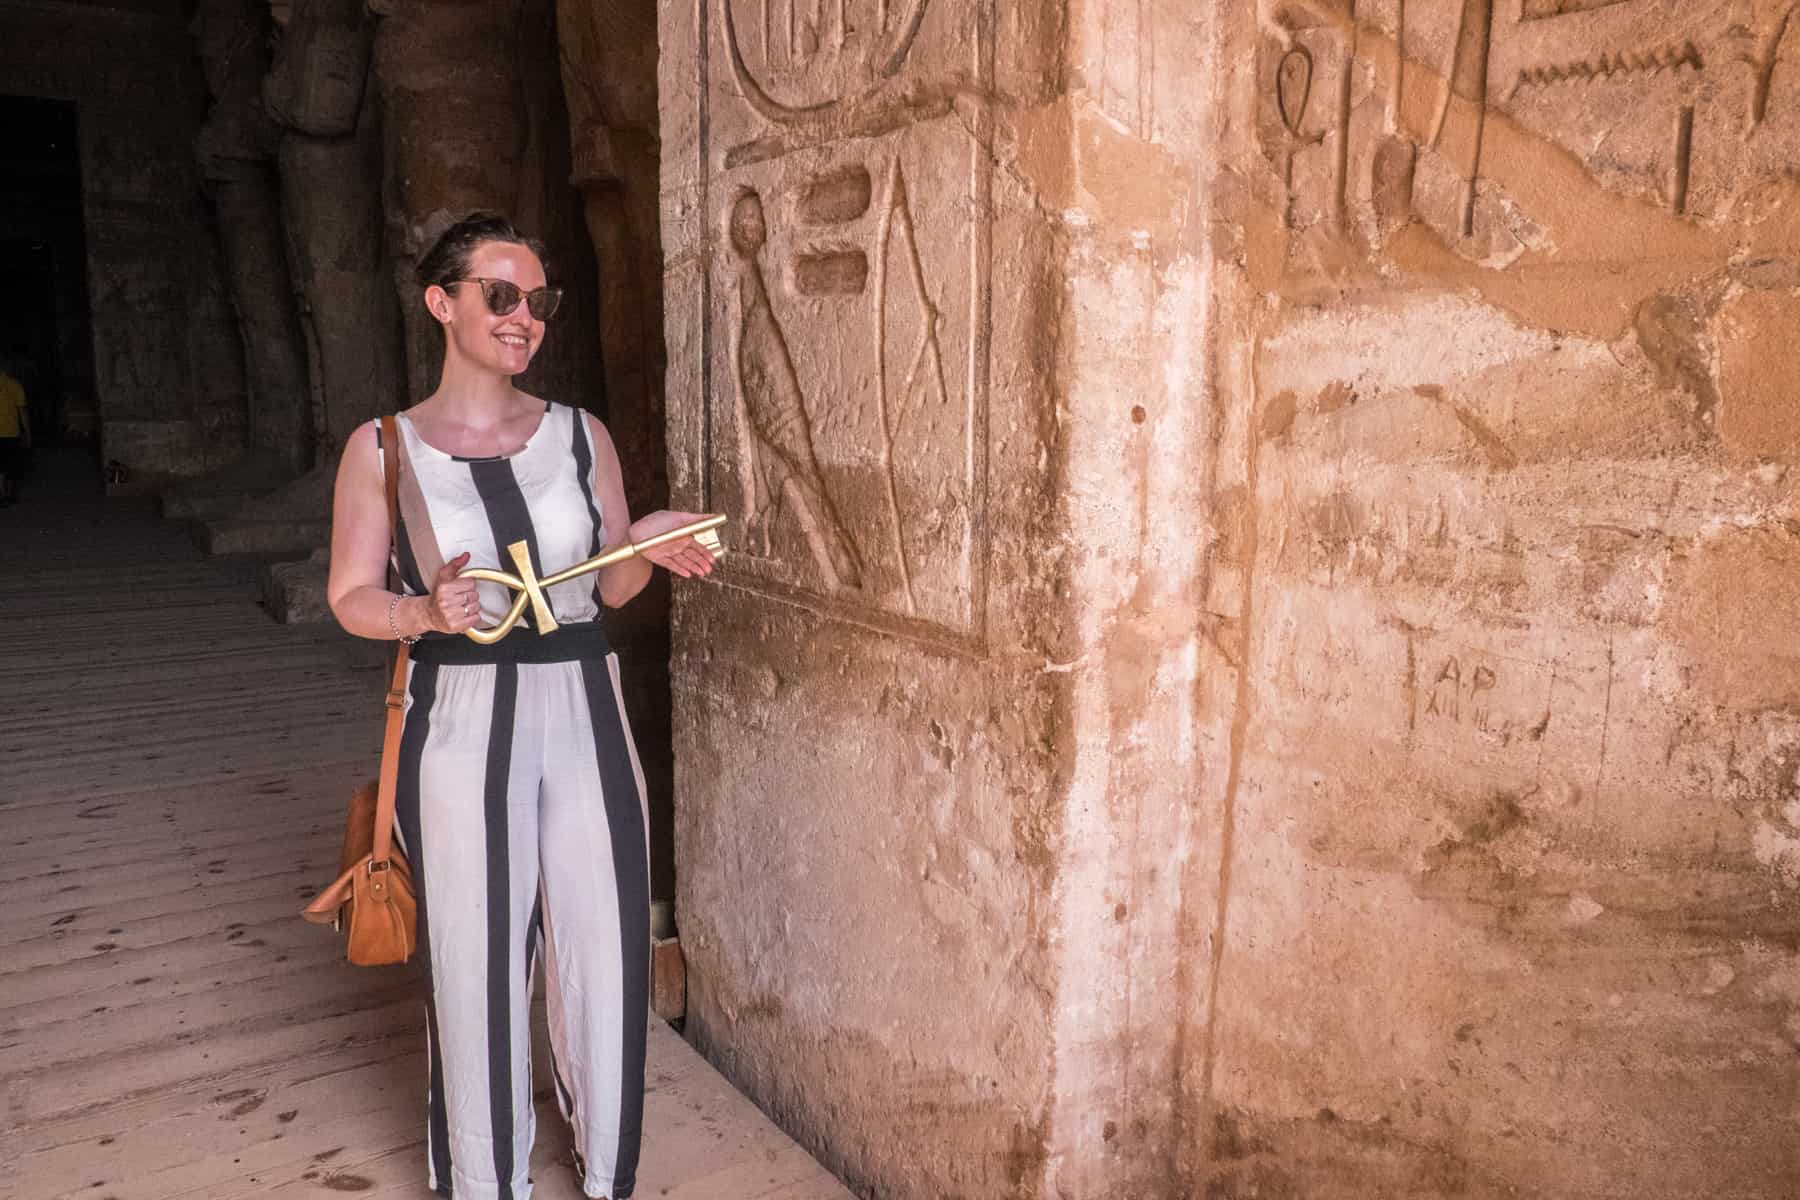 A woman holds a giant Ankh (Ancient Egyptian symbol of life) key at the entrance door to the Abu Simbel Temple in Egypt